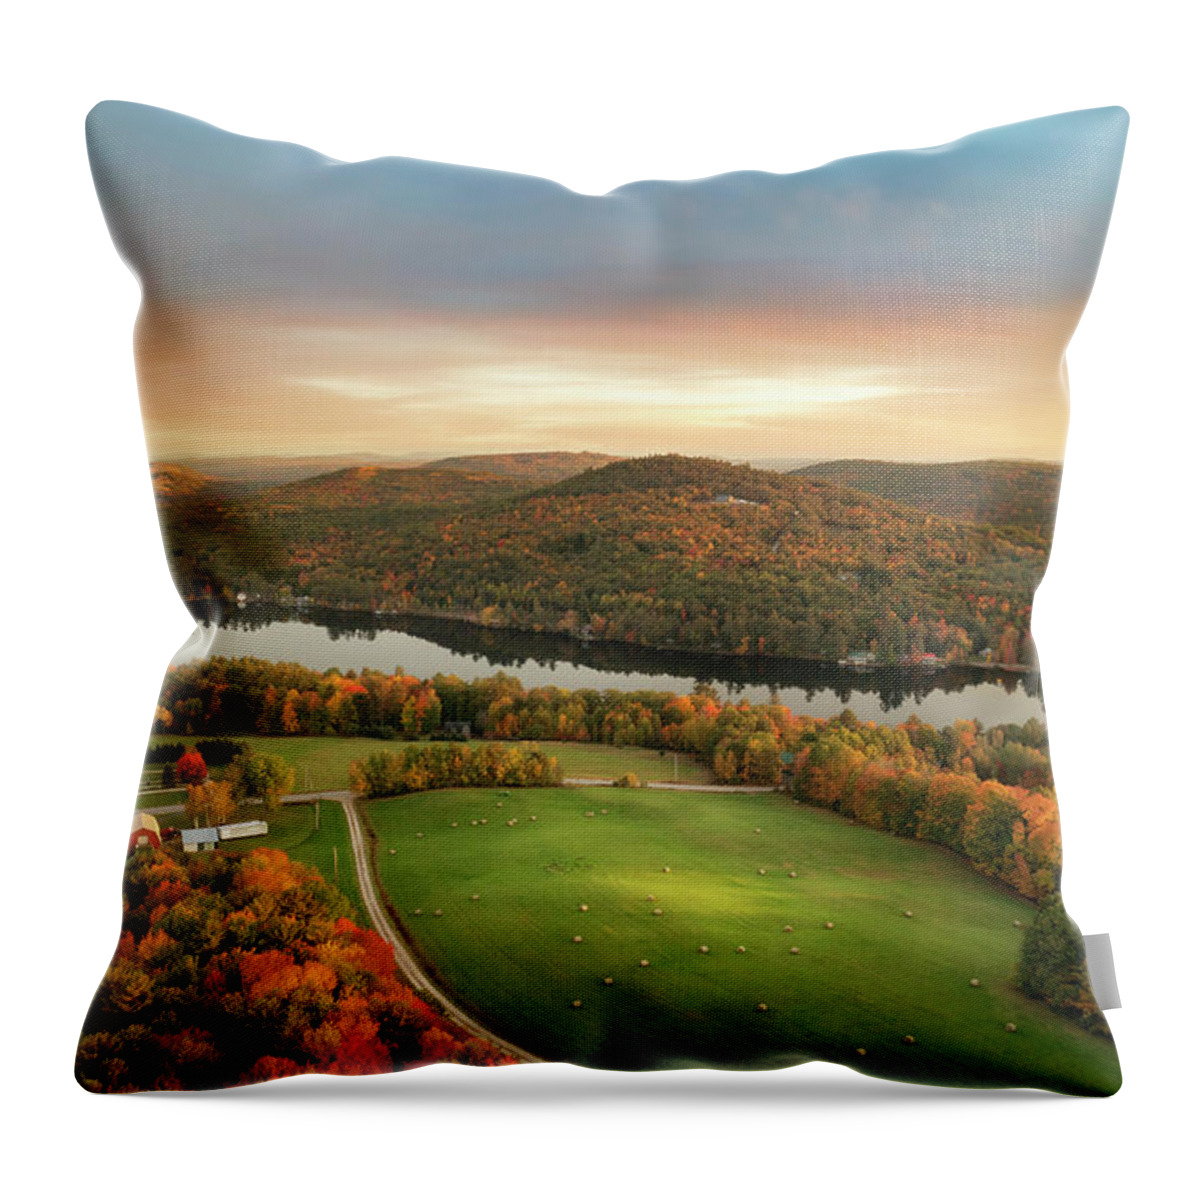 #norway#maine#pennesseewassee#sunset#summer#drone#photography#la Throw Pillow featuring the photograph Little Pennesseewassee Sunset by Darylann Leonard Photography